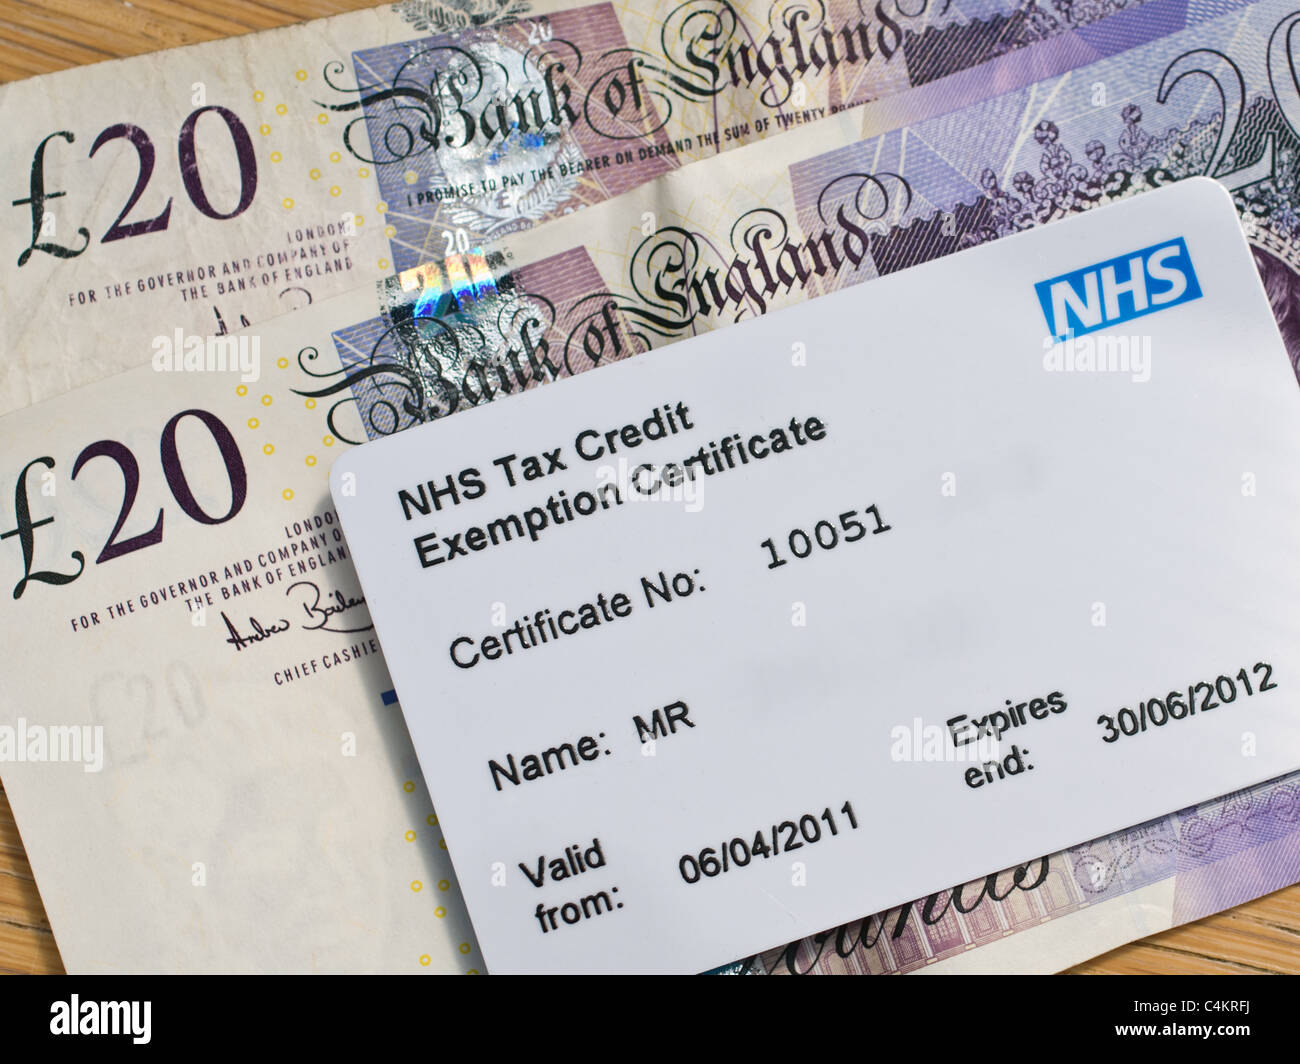 NHS Tax Credit Exemption Certificate / Card (on top of cash money) Stock Photo